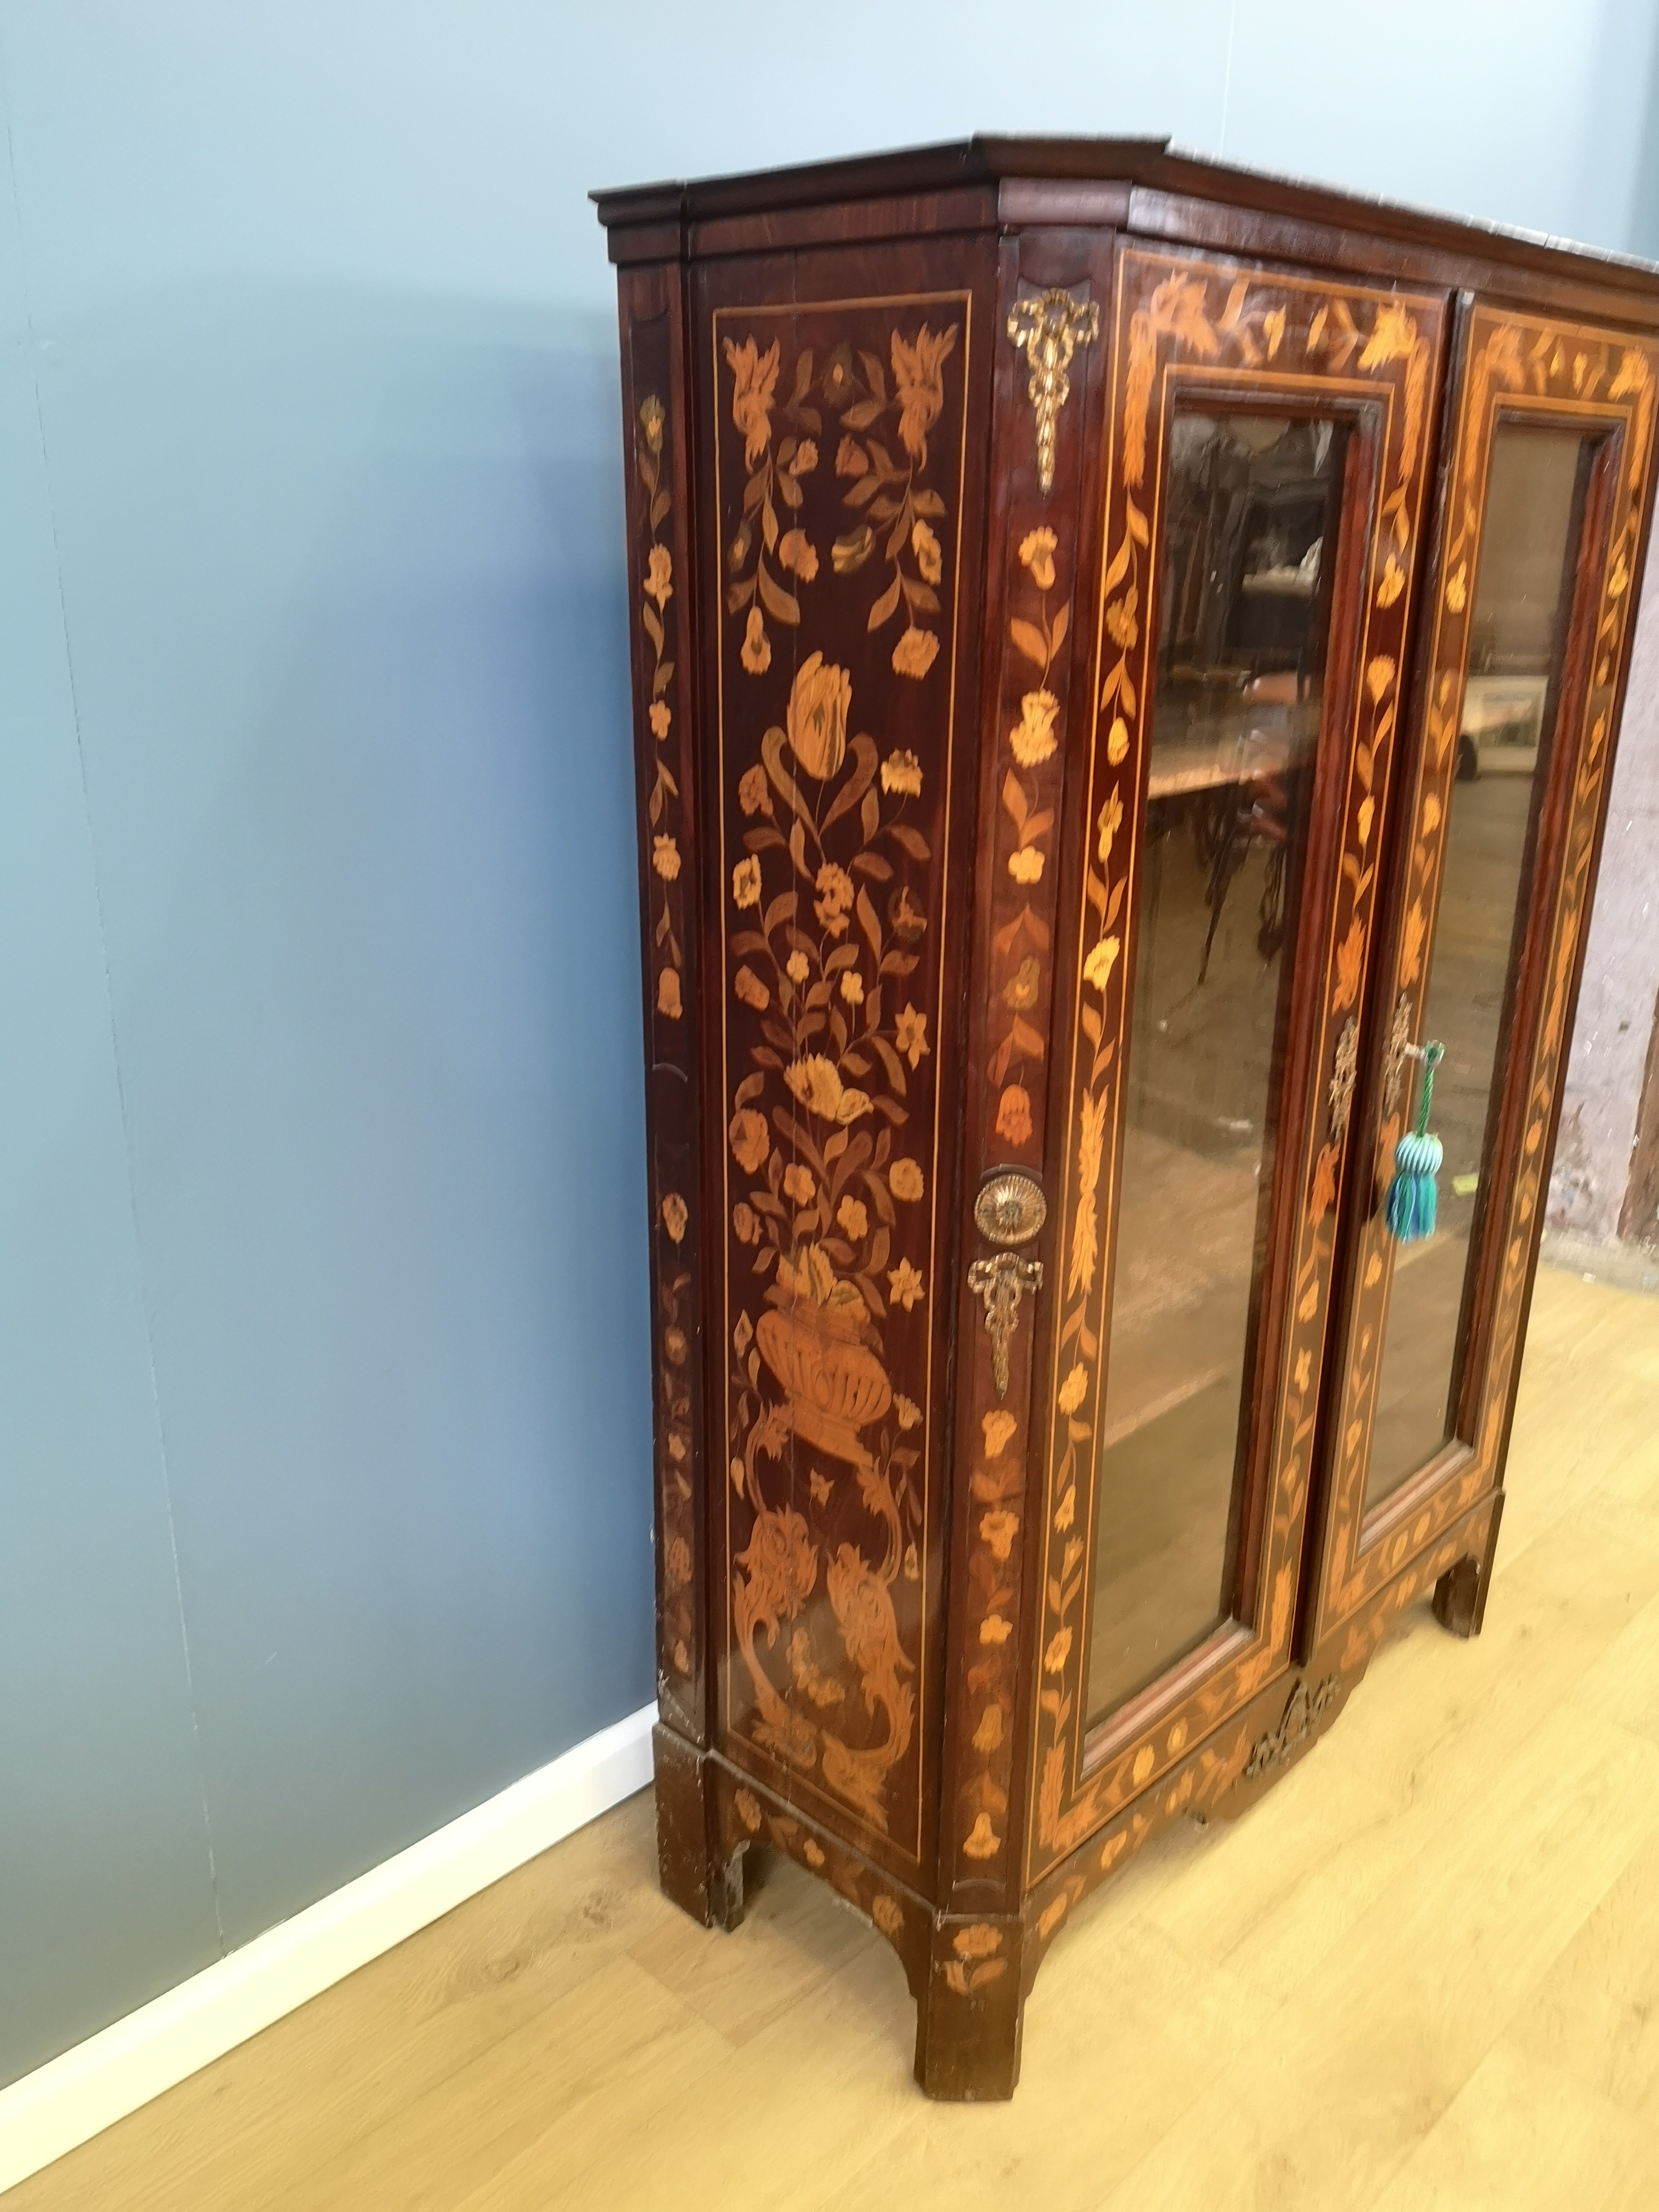 Mahogany glass fronted bookcase - Image 3 of 6